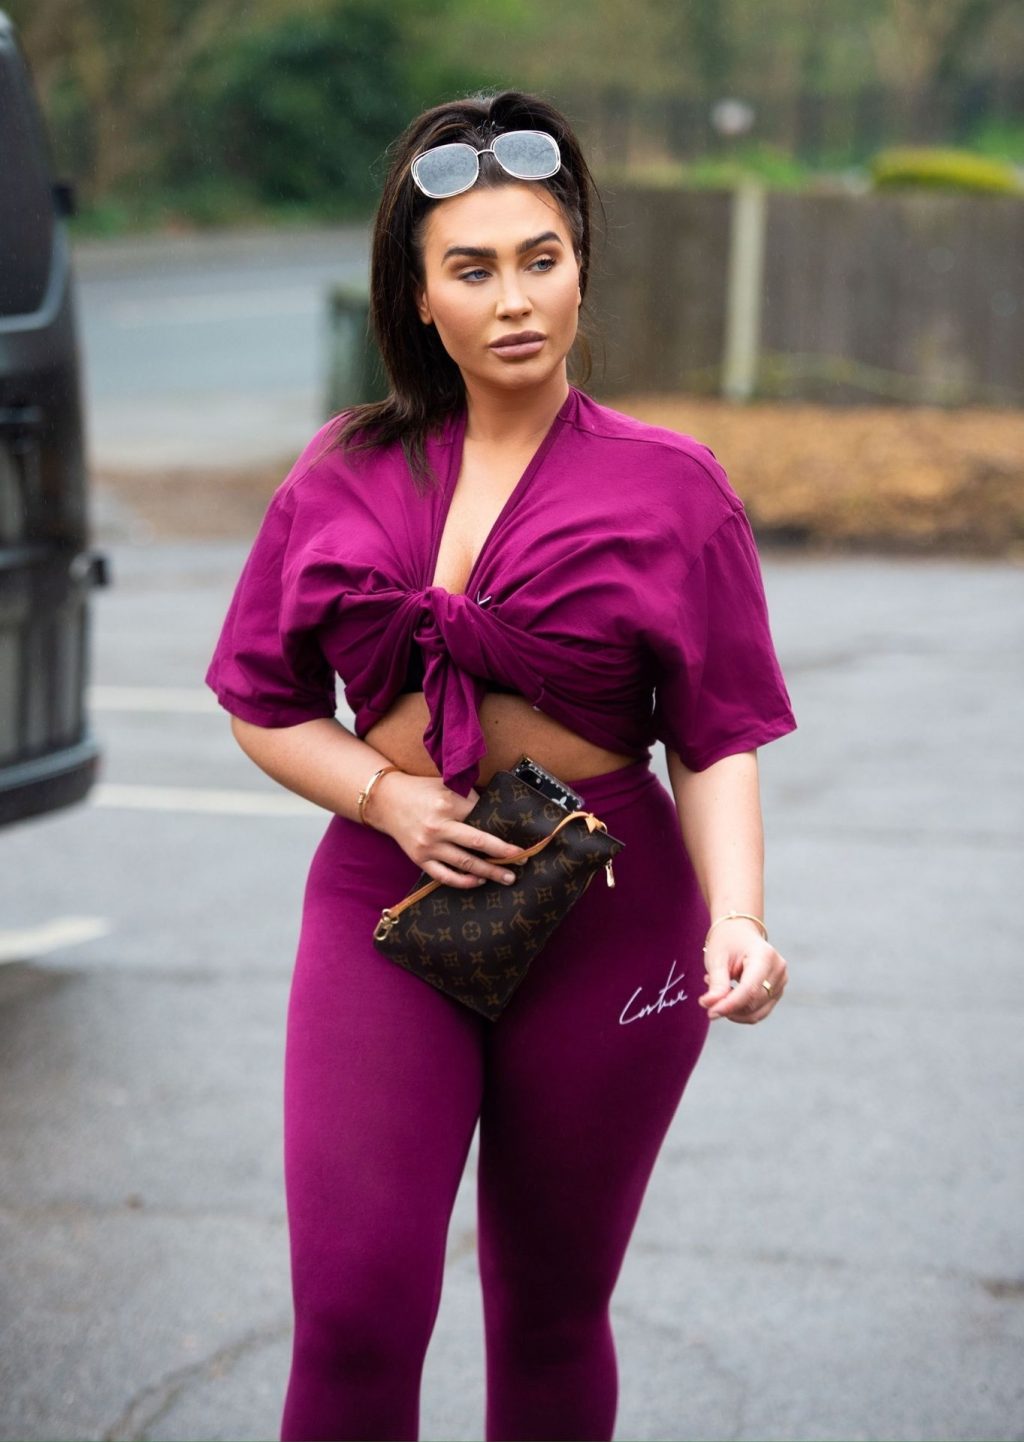 Lauren Goodger Is Seen Leaving Her Home Yesterday to Go for a Run in Essex (6 Photos)